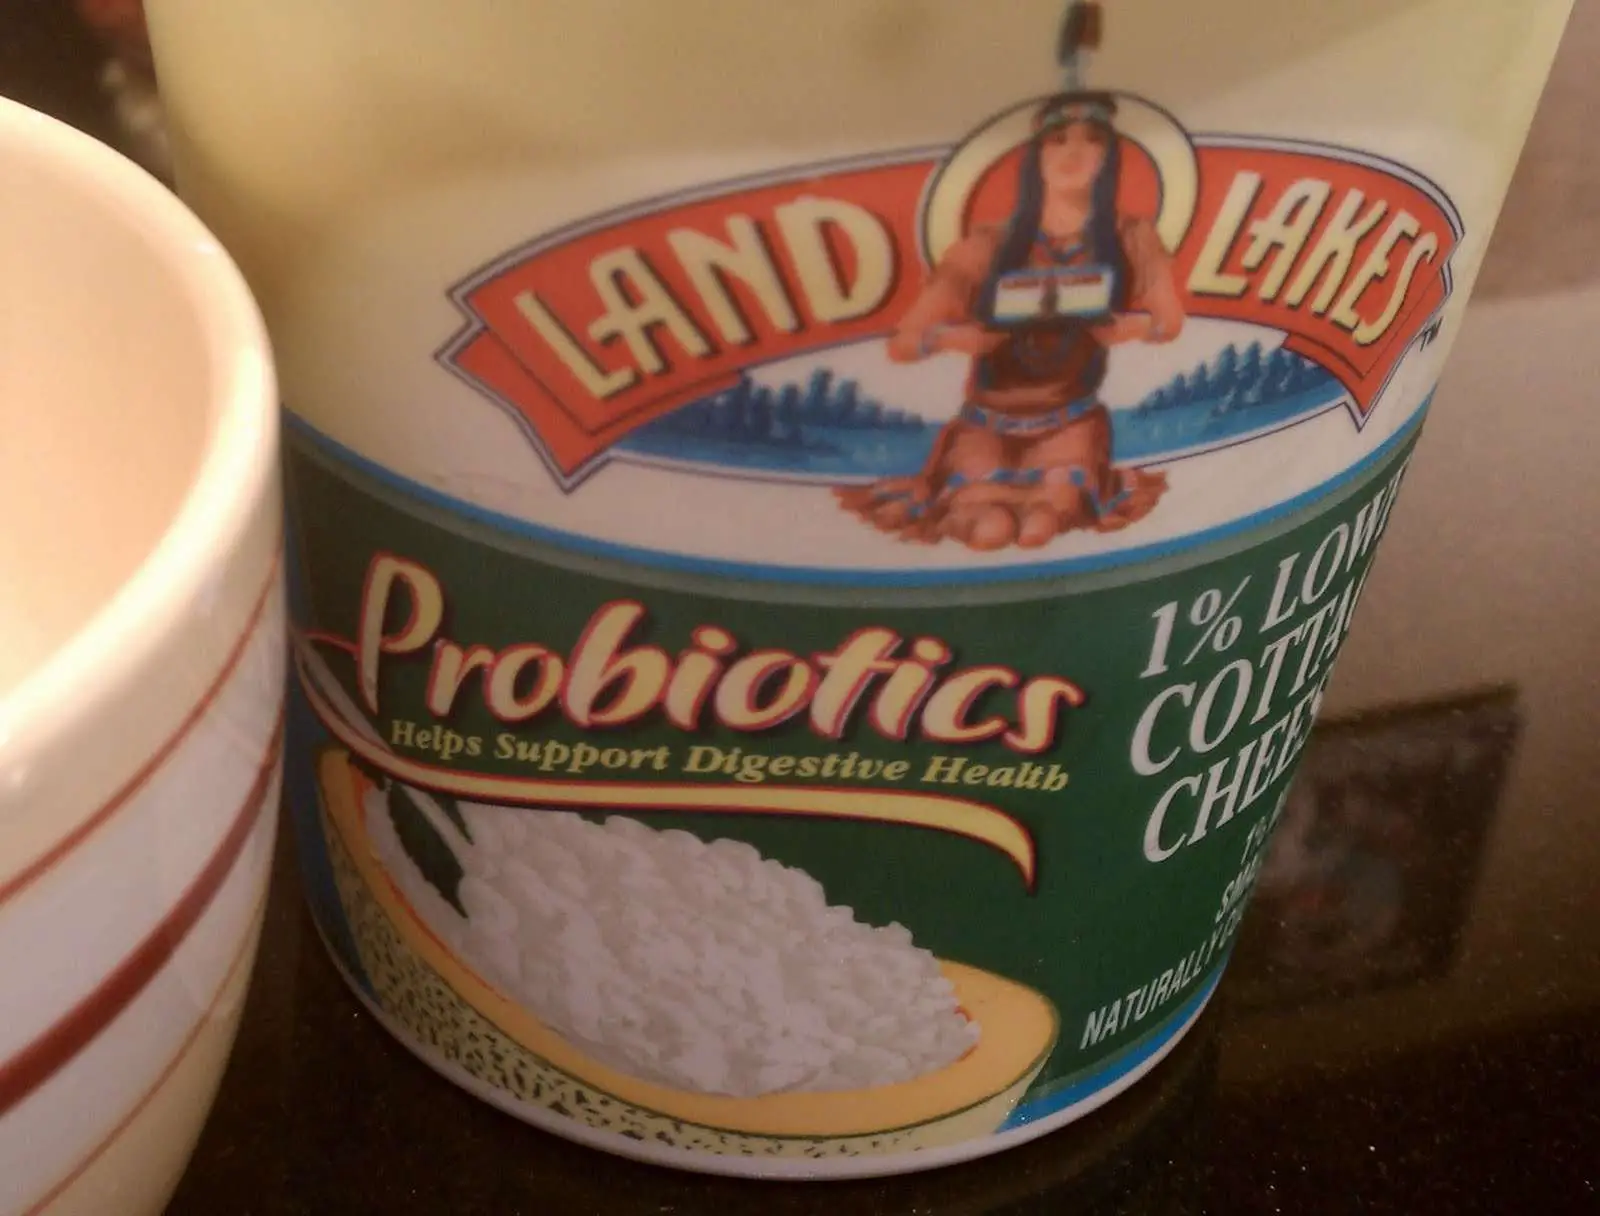 Probiotic cottage cheese